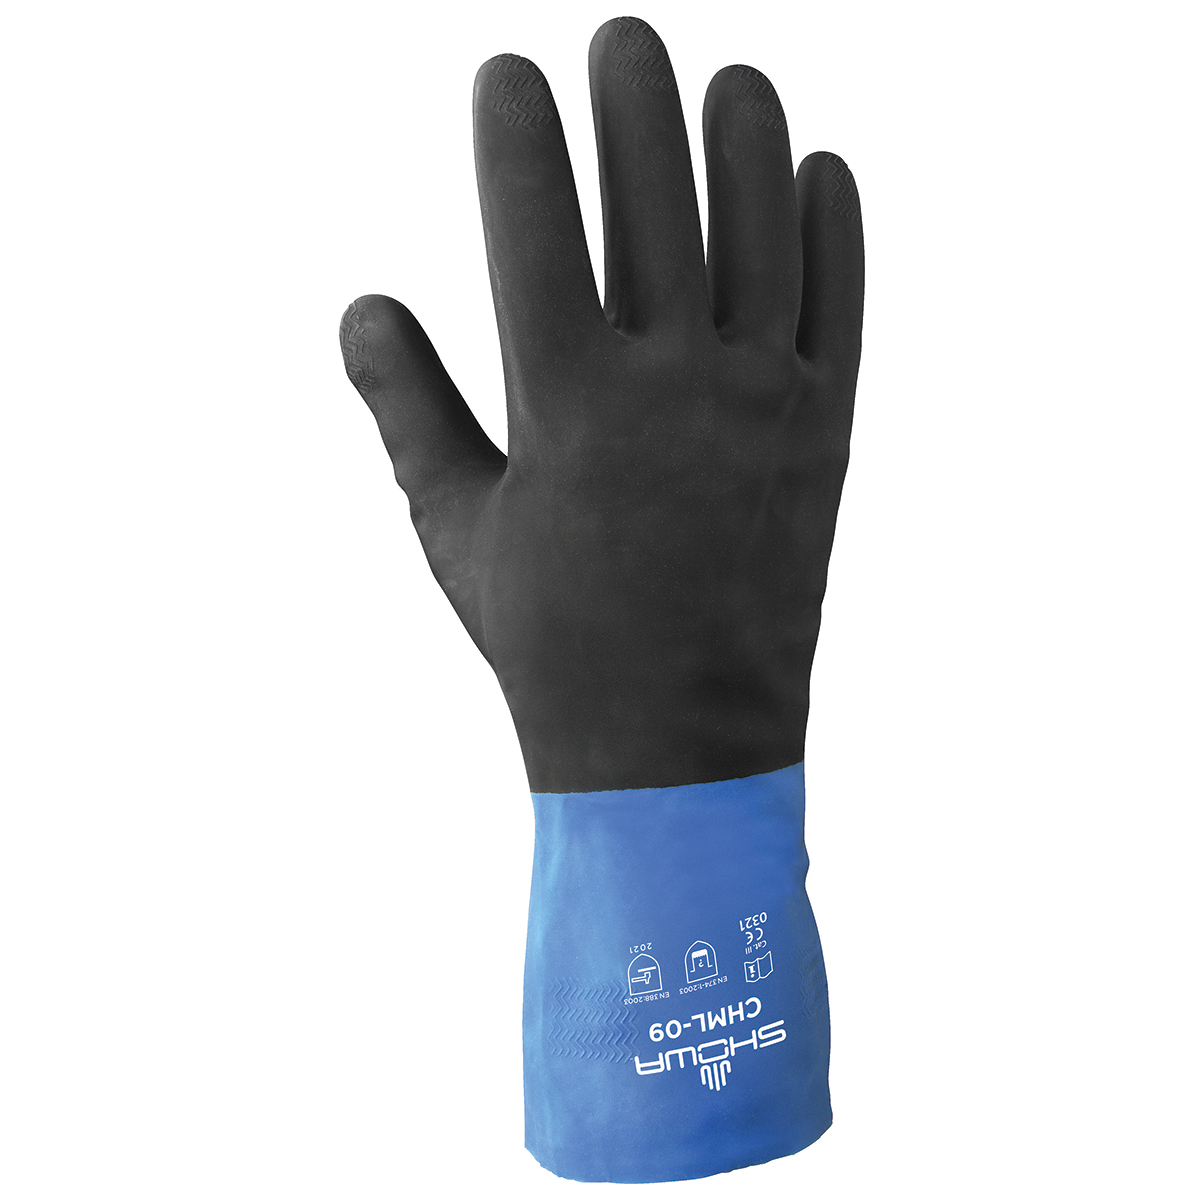 Chemical resistant, neoprene-over-natural rubber latex, unsupported, 12", 26-mil, flock lined, black over blue safety feature, large